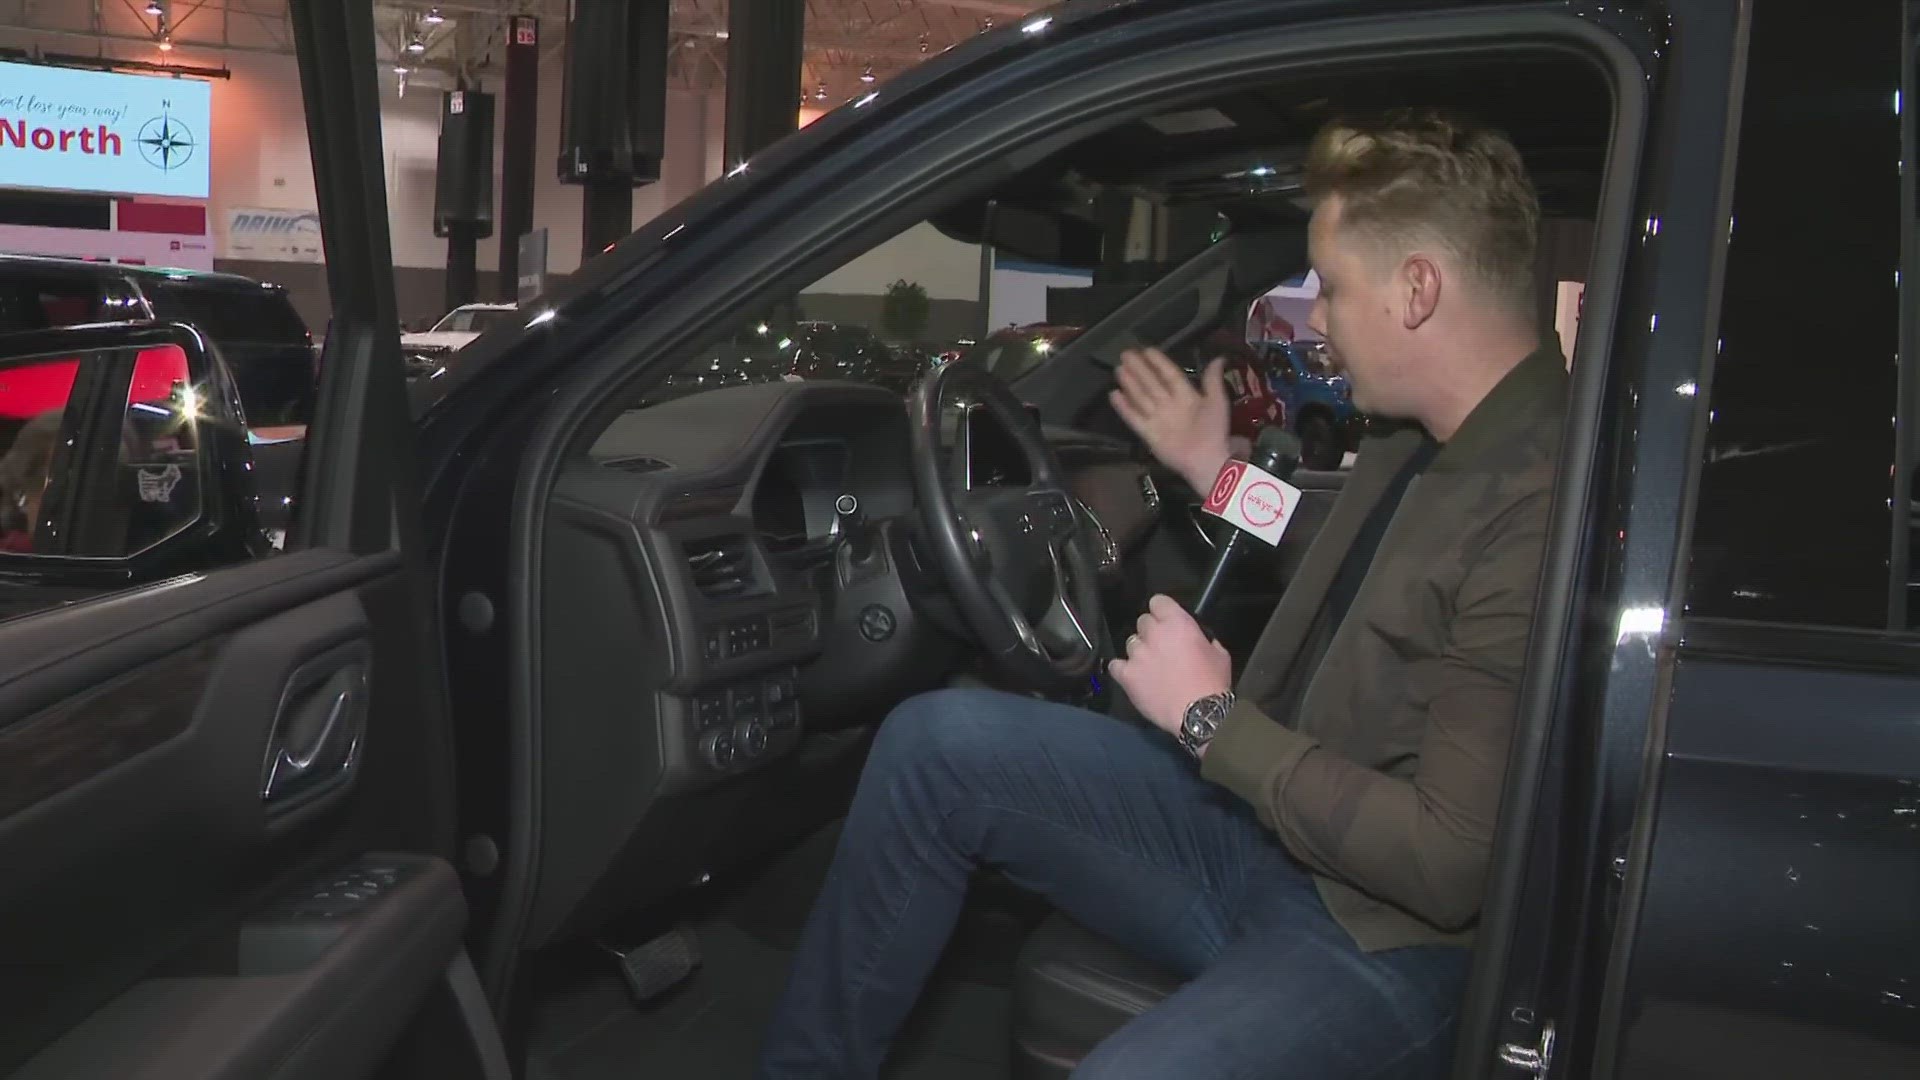 The Cleveland Auto Show is back at the I-X Center! 3News' Austin Love is there for a special sneak peek.